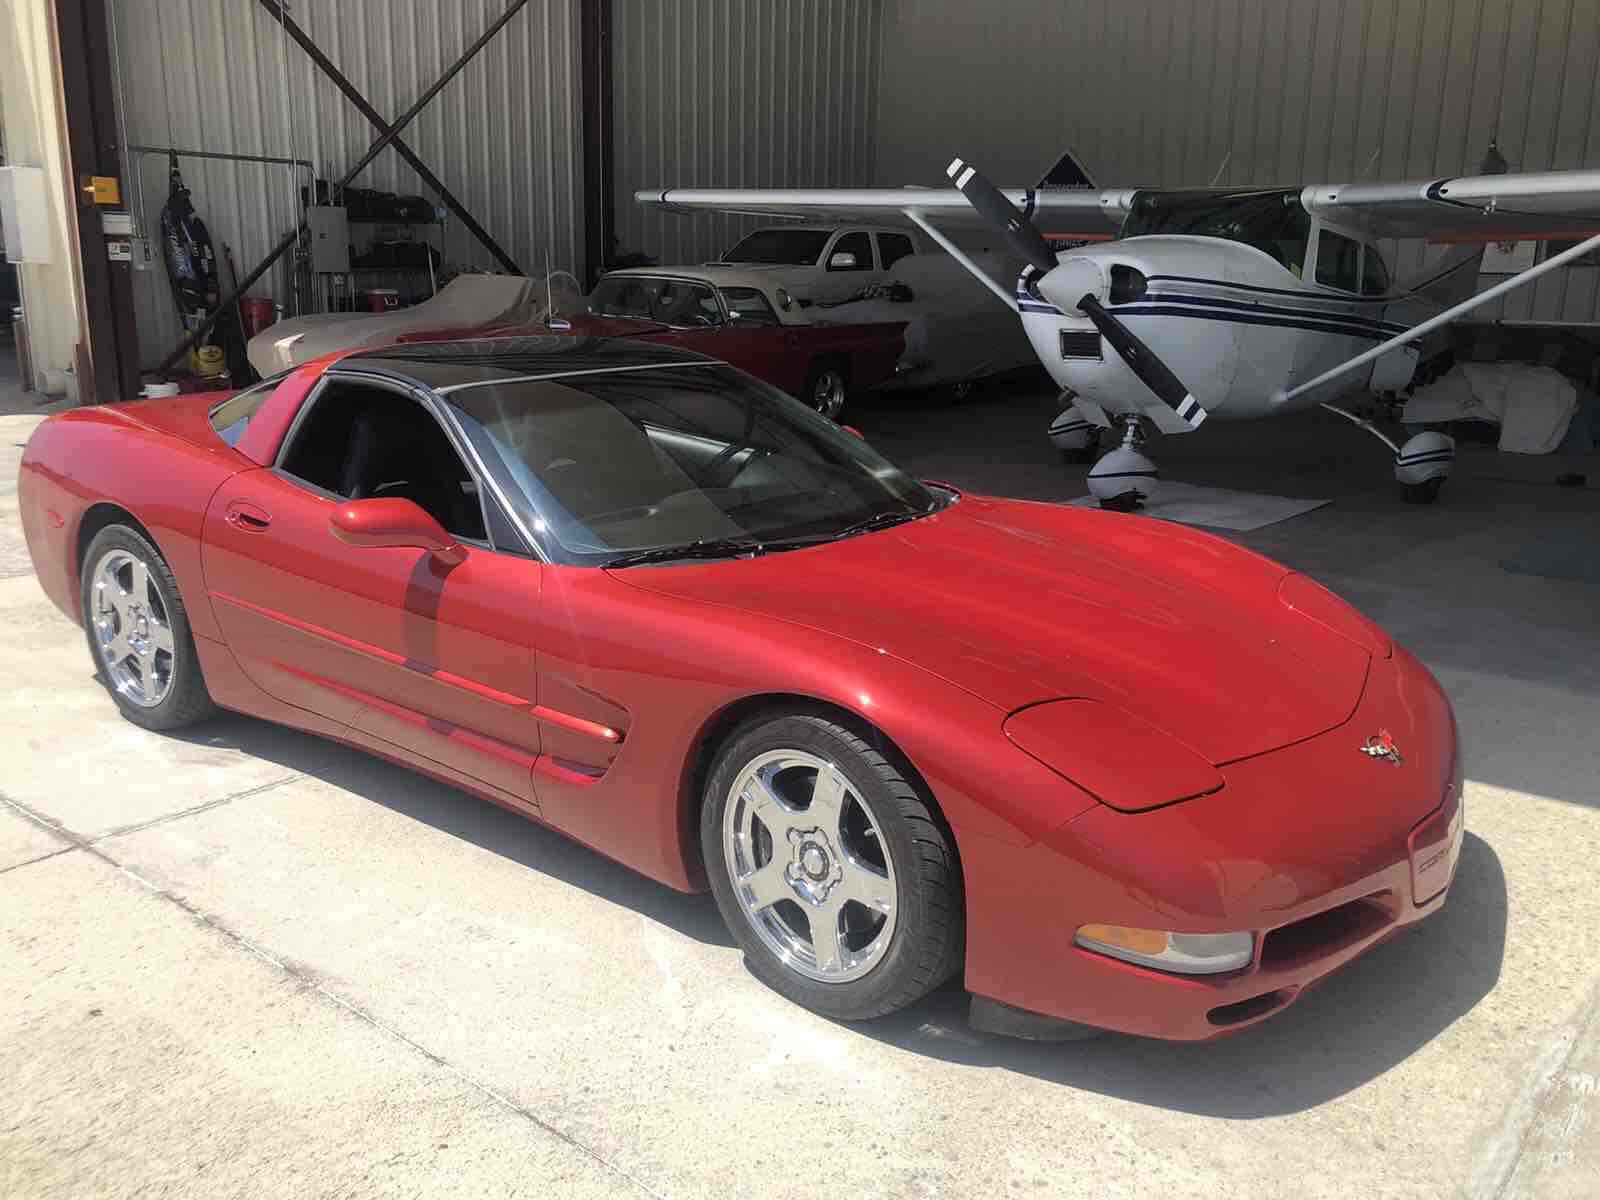 Exterior view of a 1997 Chevy Corvette, an example of a fifth-generation Corvette.